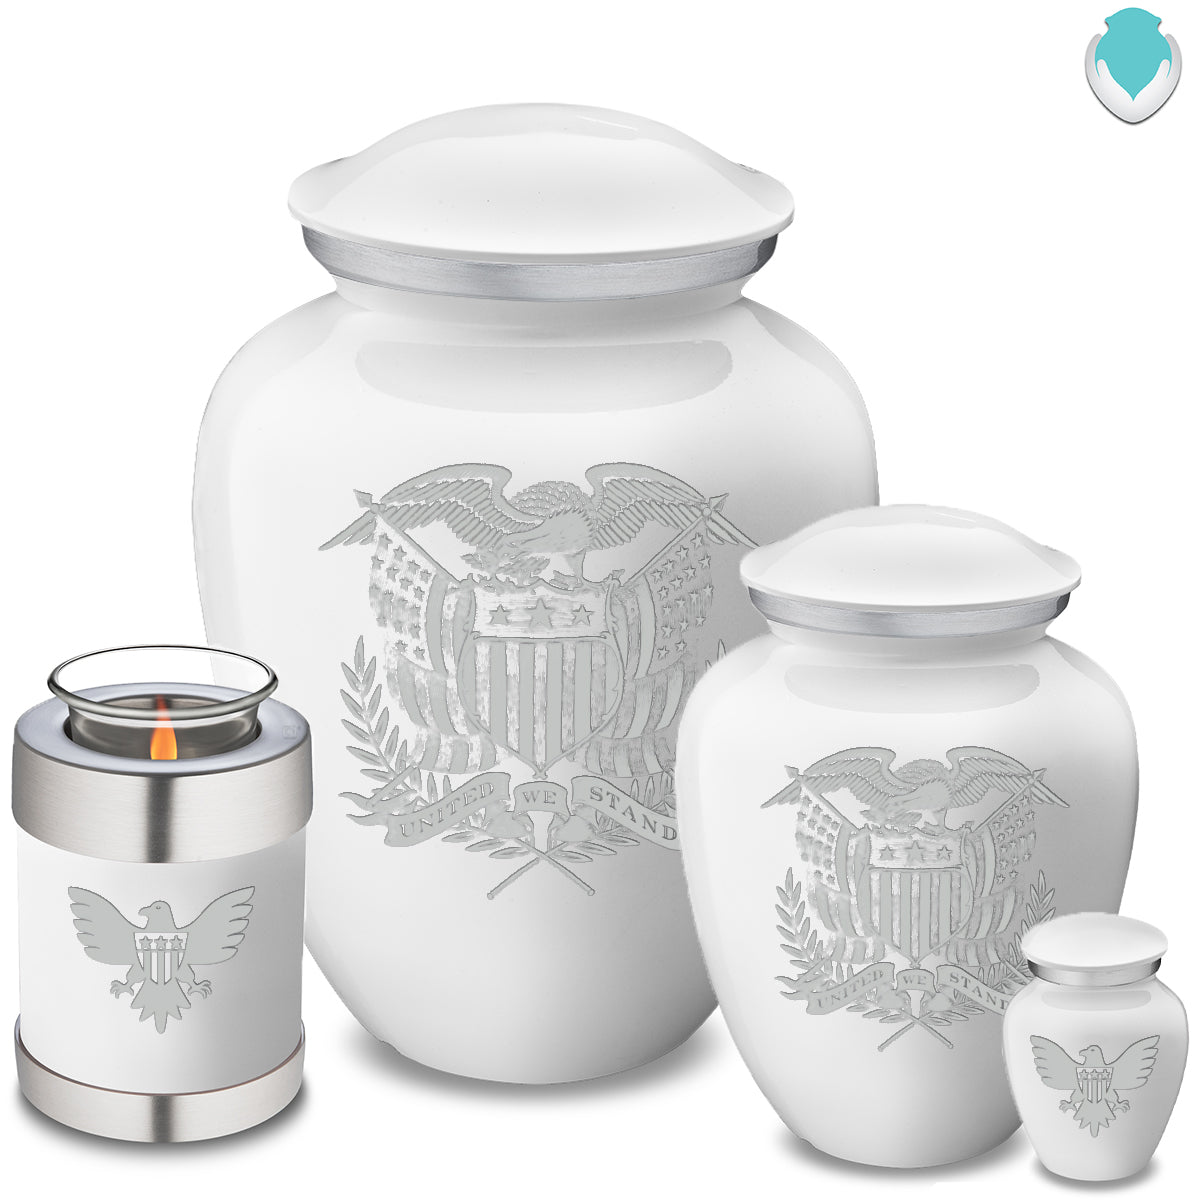 Adult Embrace White American Glory Cremation Urn